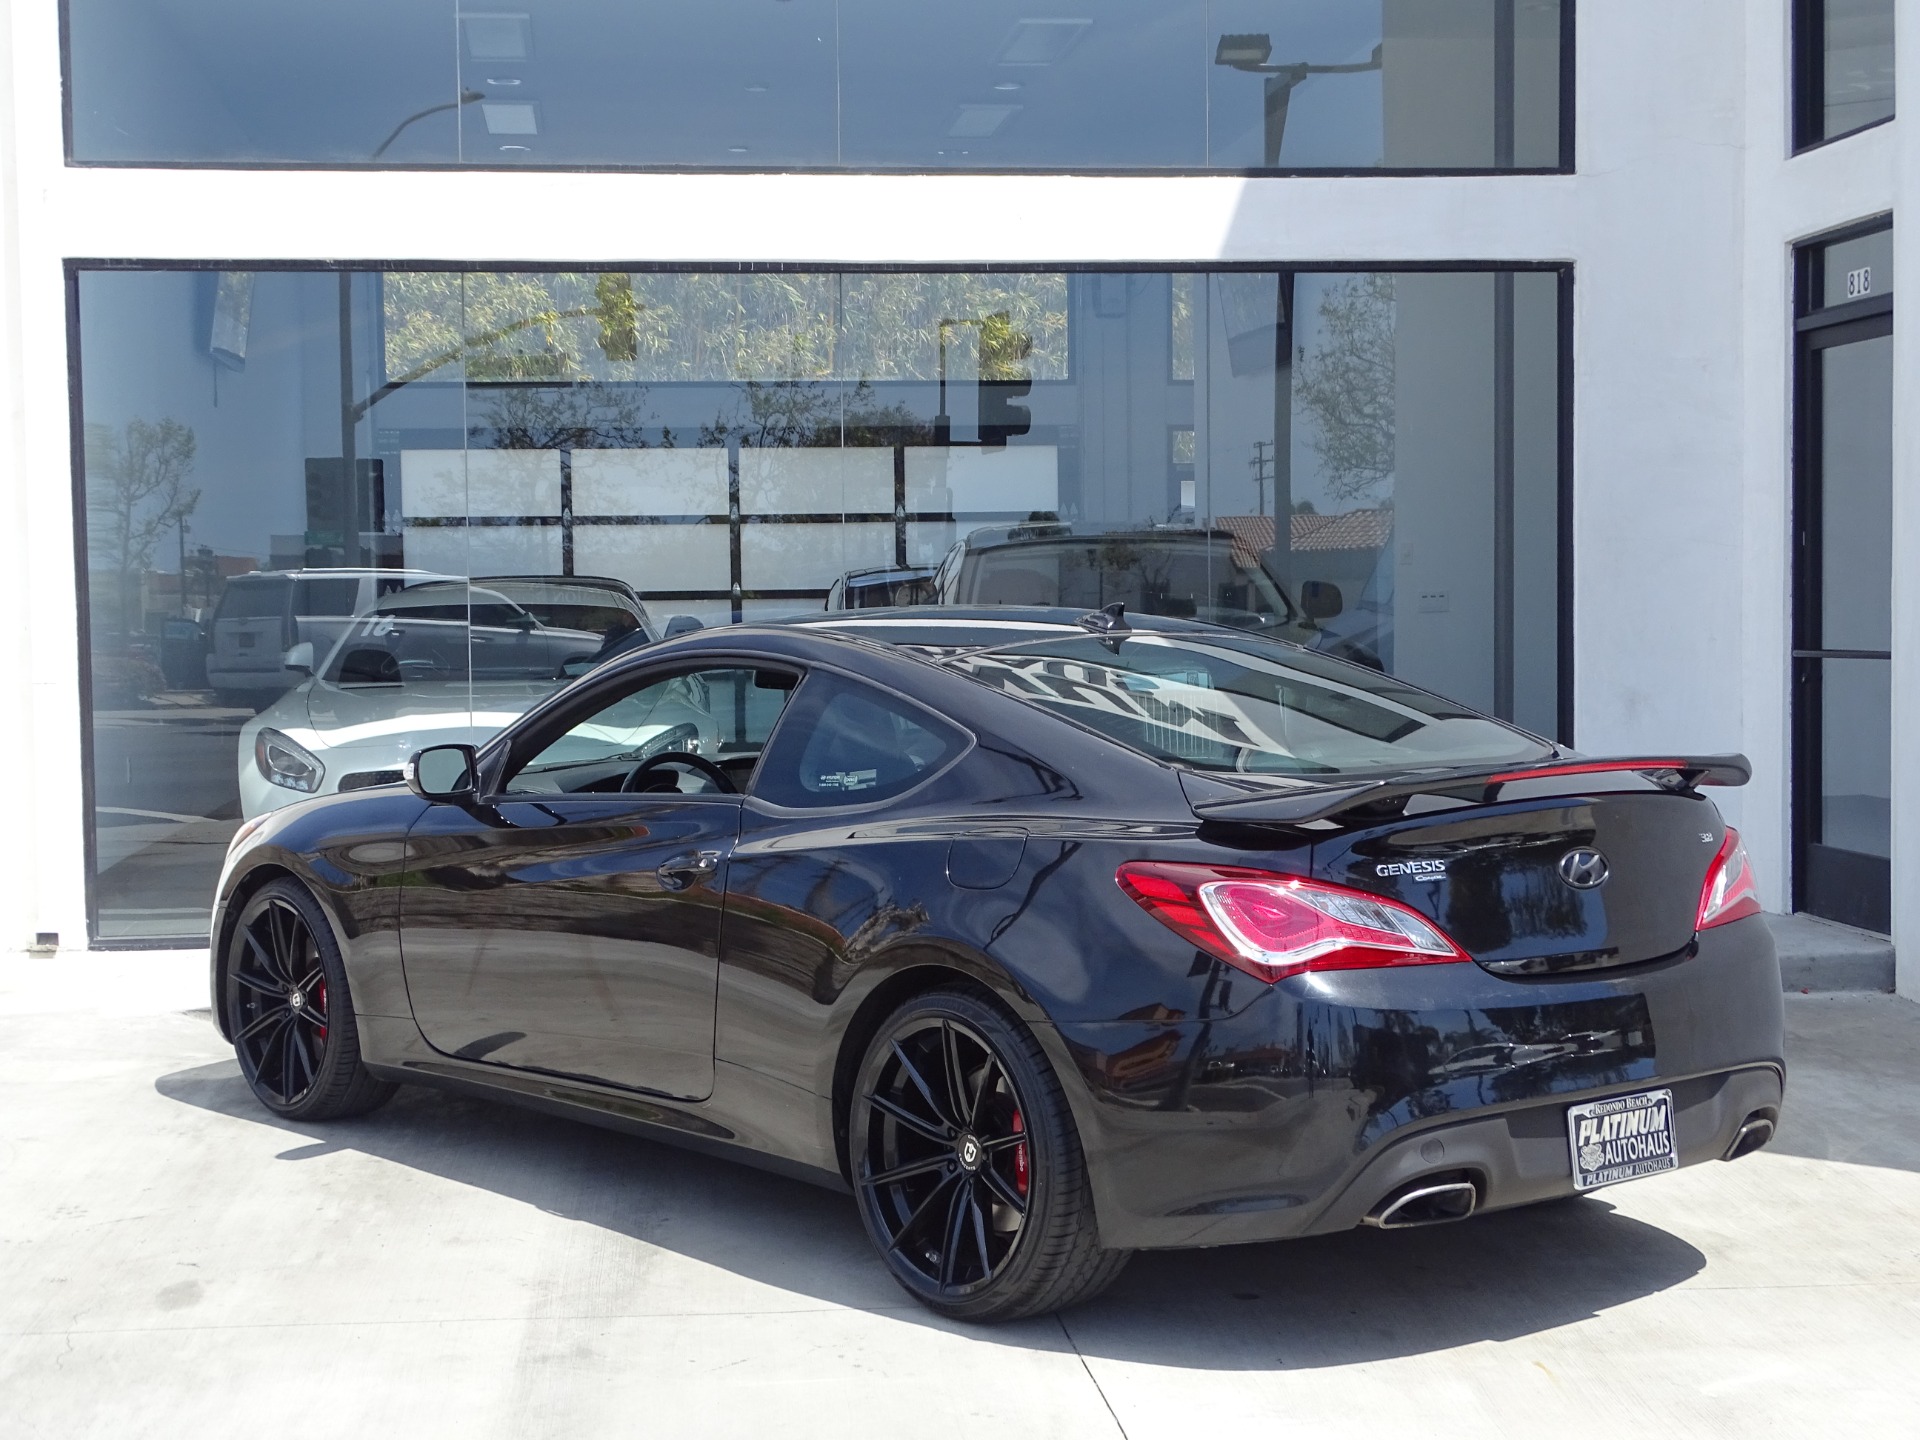 2013 Hyundai Genesis Coupe 3 8 R Spec Stock 6395a For Sale